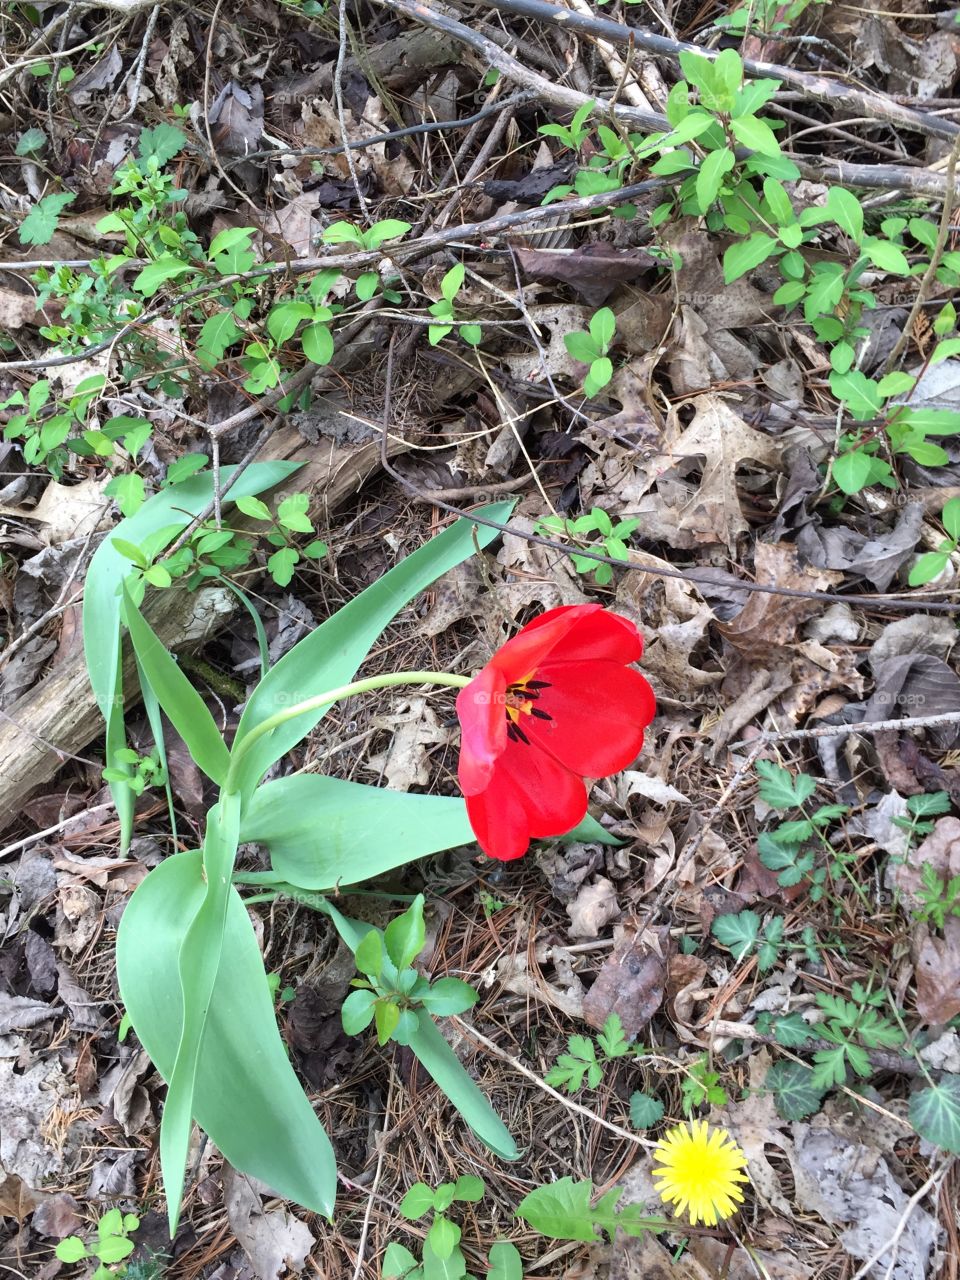 A beautiful bright red tulip standing above the brittle brown leaves left over from the harsh winter elements. Slightly surrounded with newly budded green leaves. And a burst of sunshine like color from a single standing dandelion. 